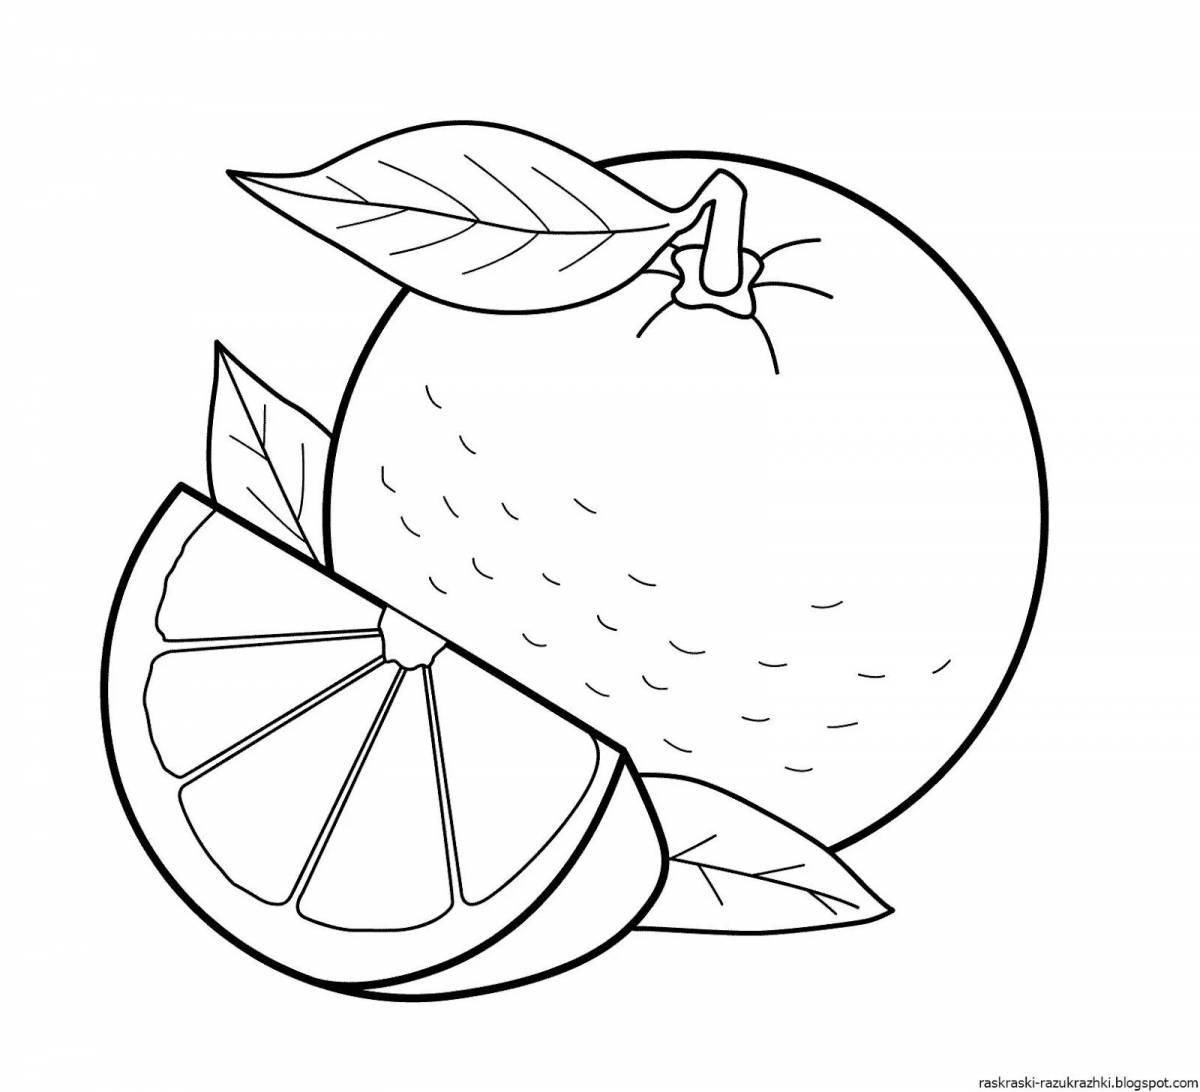 Adorable fruits coloring book for kids